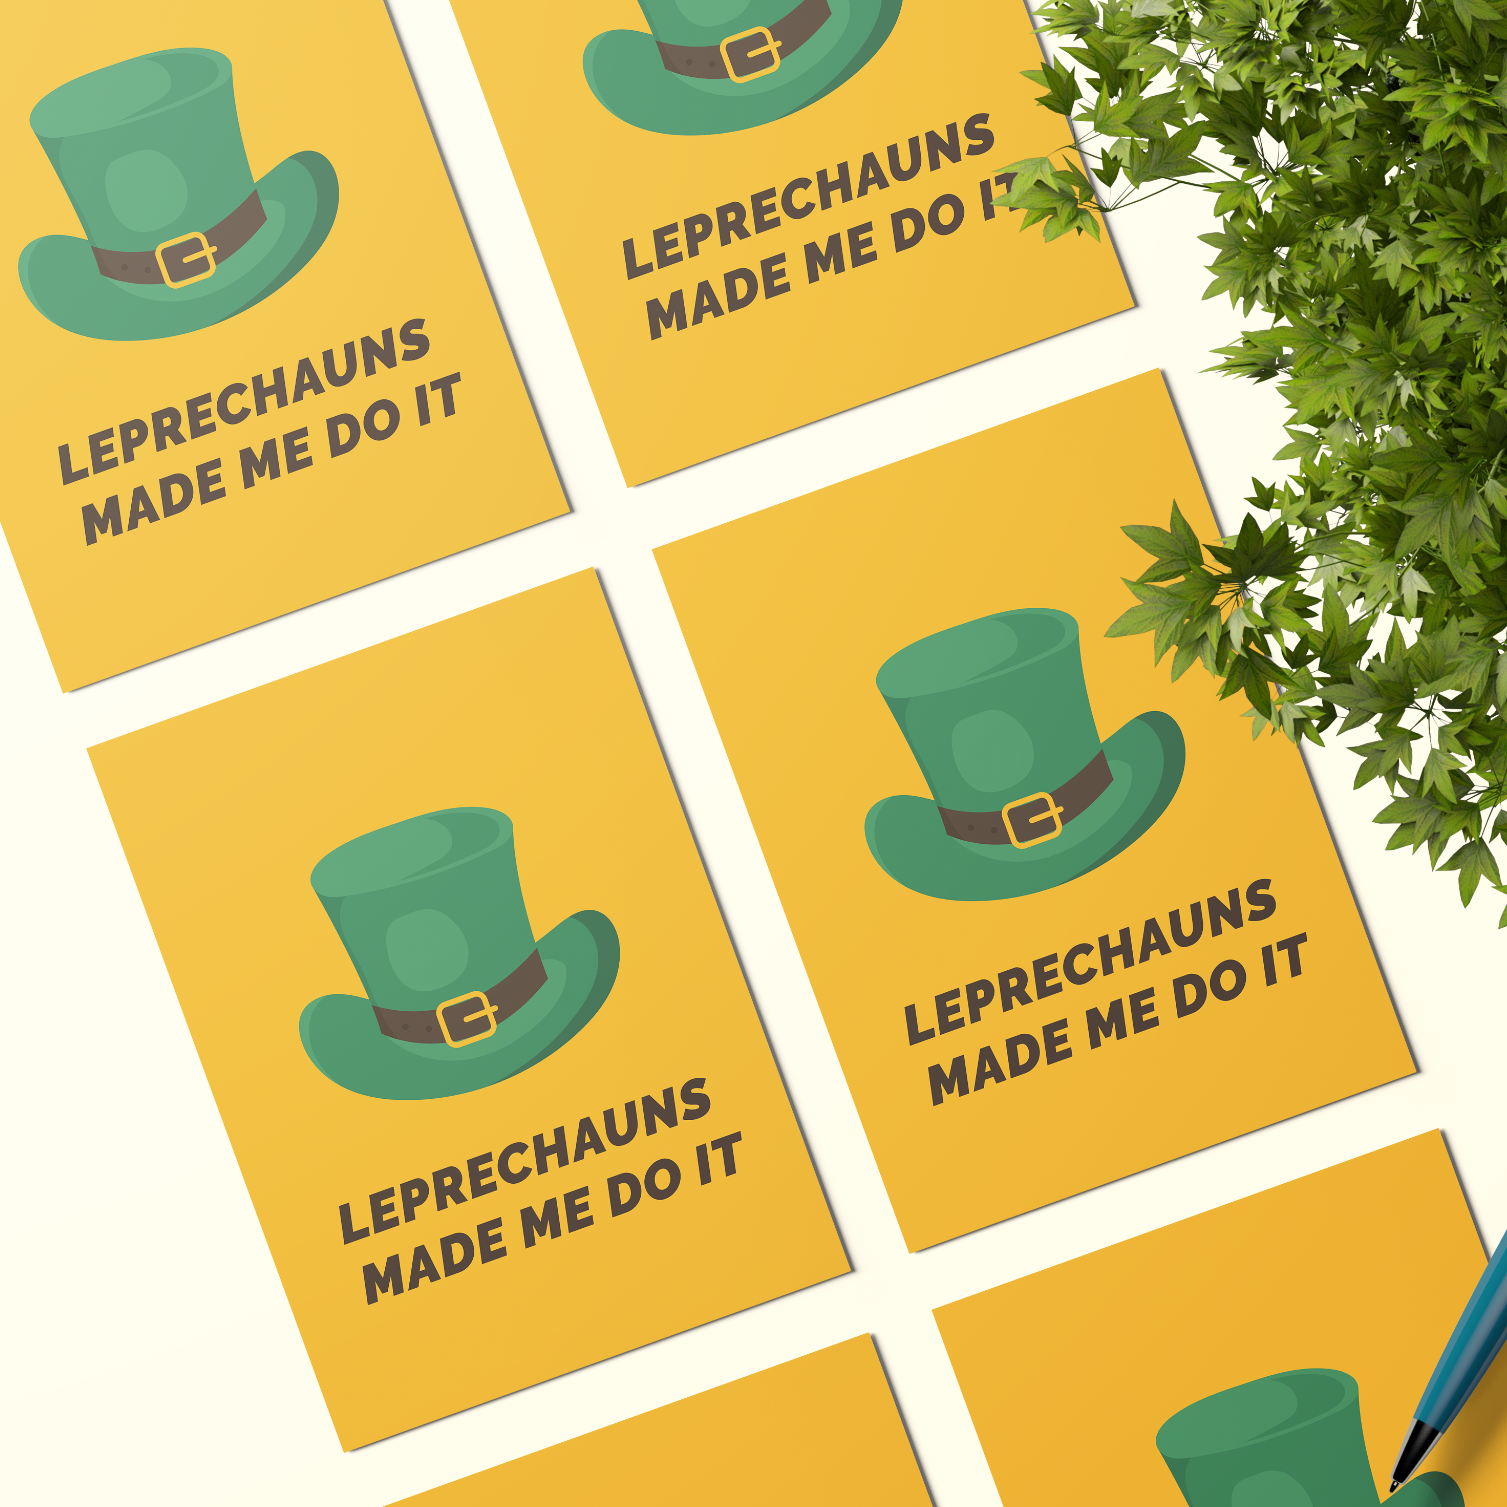 St. Patrick's Day: Leprechaun's Made Me Postcard Bundle - Pack Of 5 or 10.